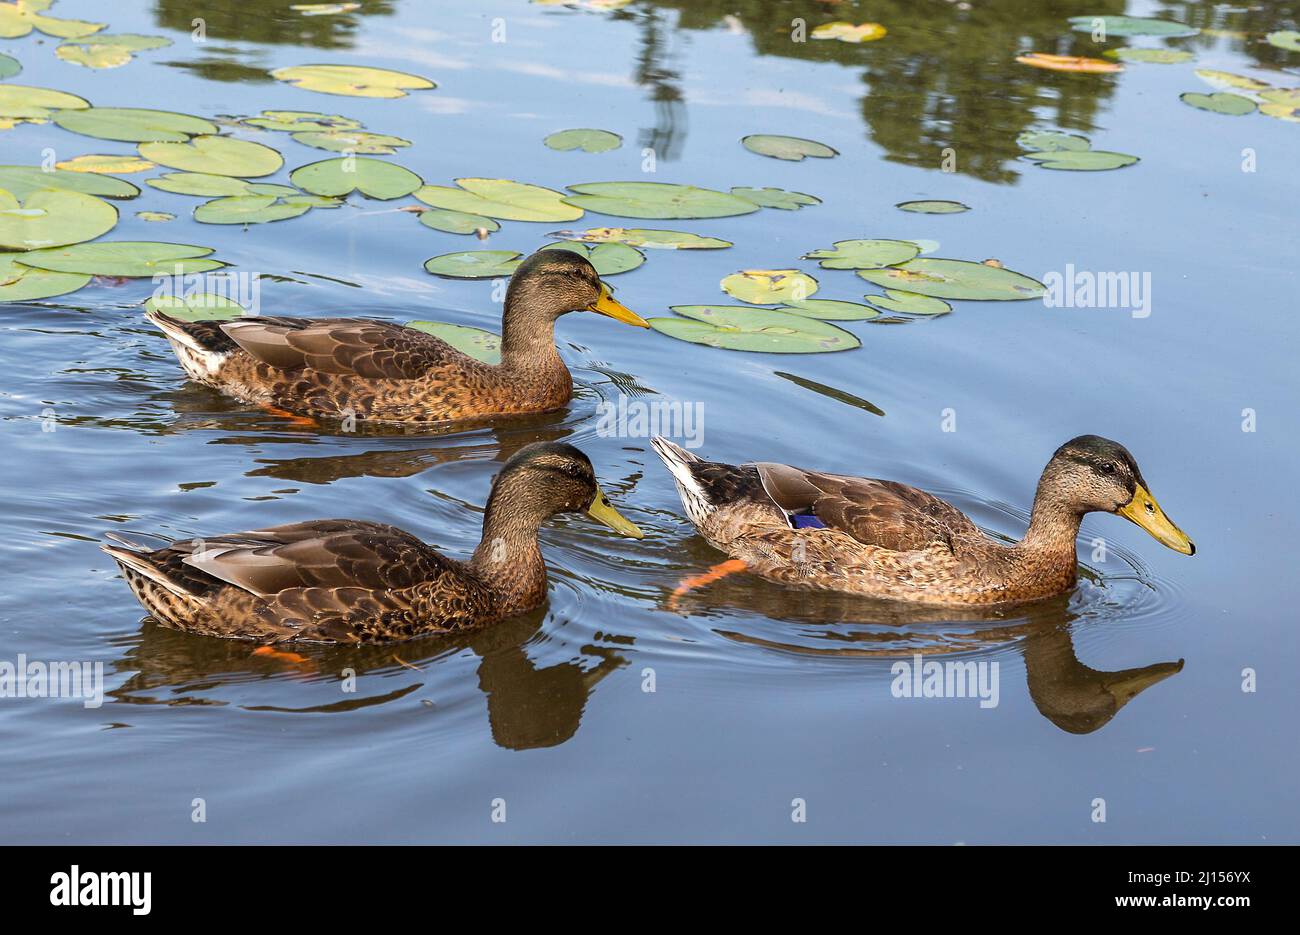 A trio of female mallards paddling across a pond invoking a sense of calmness and oneness with nature. Stock Photo